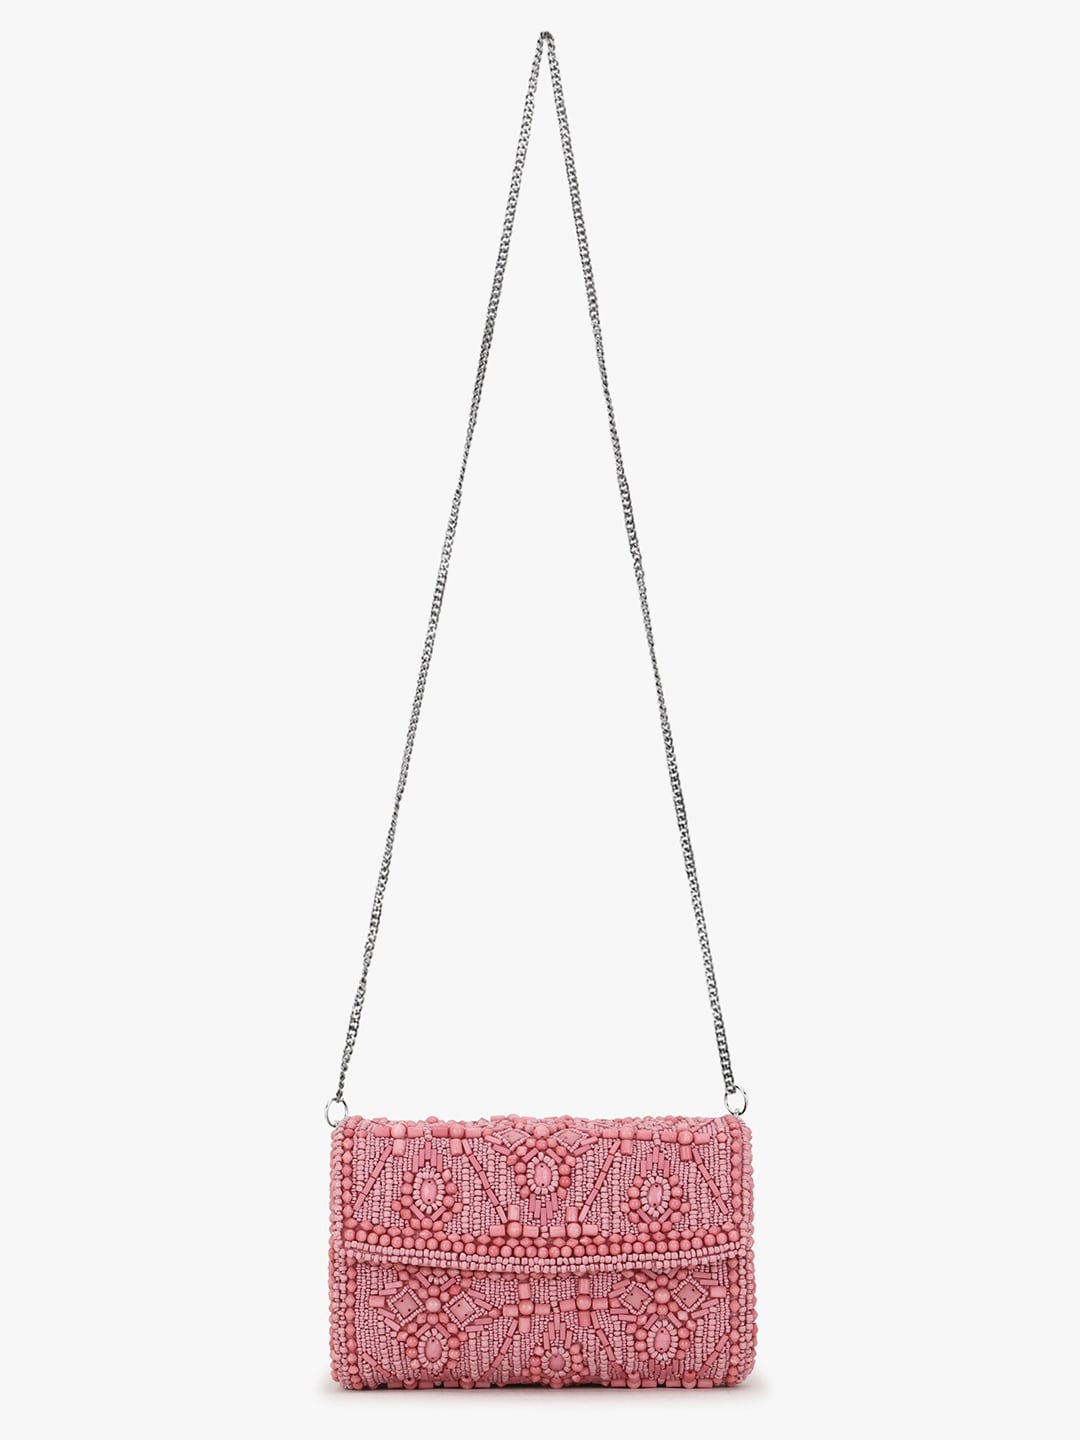 Anekaant Pink Embellished Foldover Clutch - Distacart